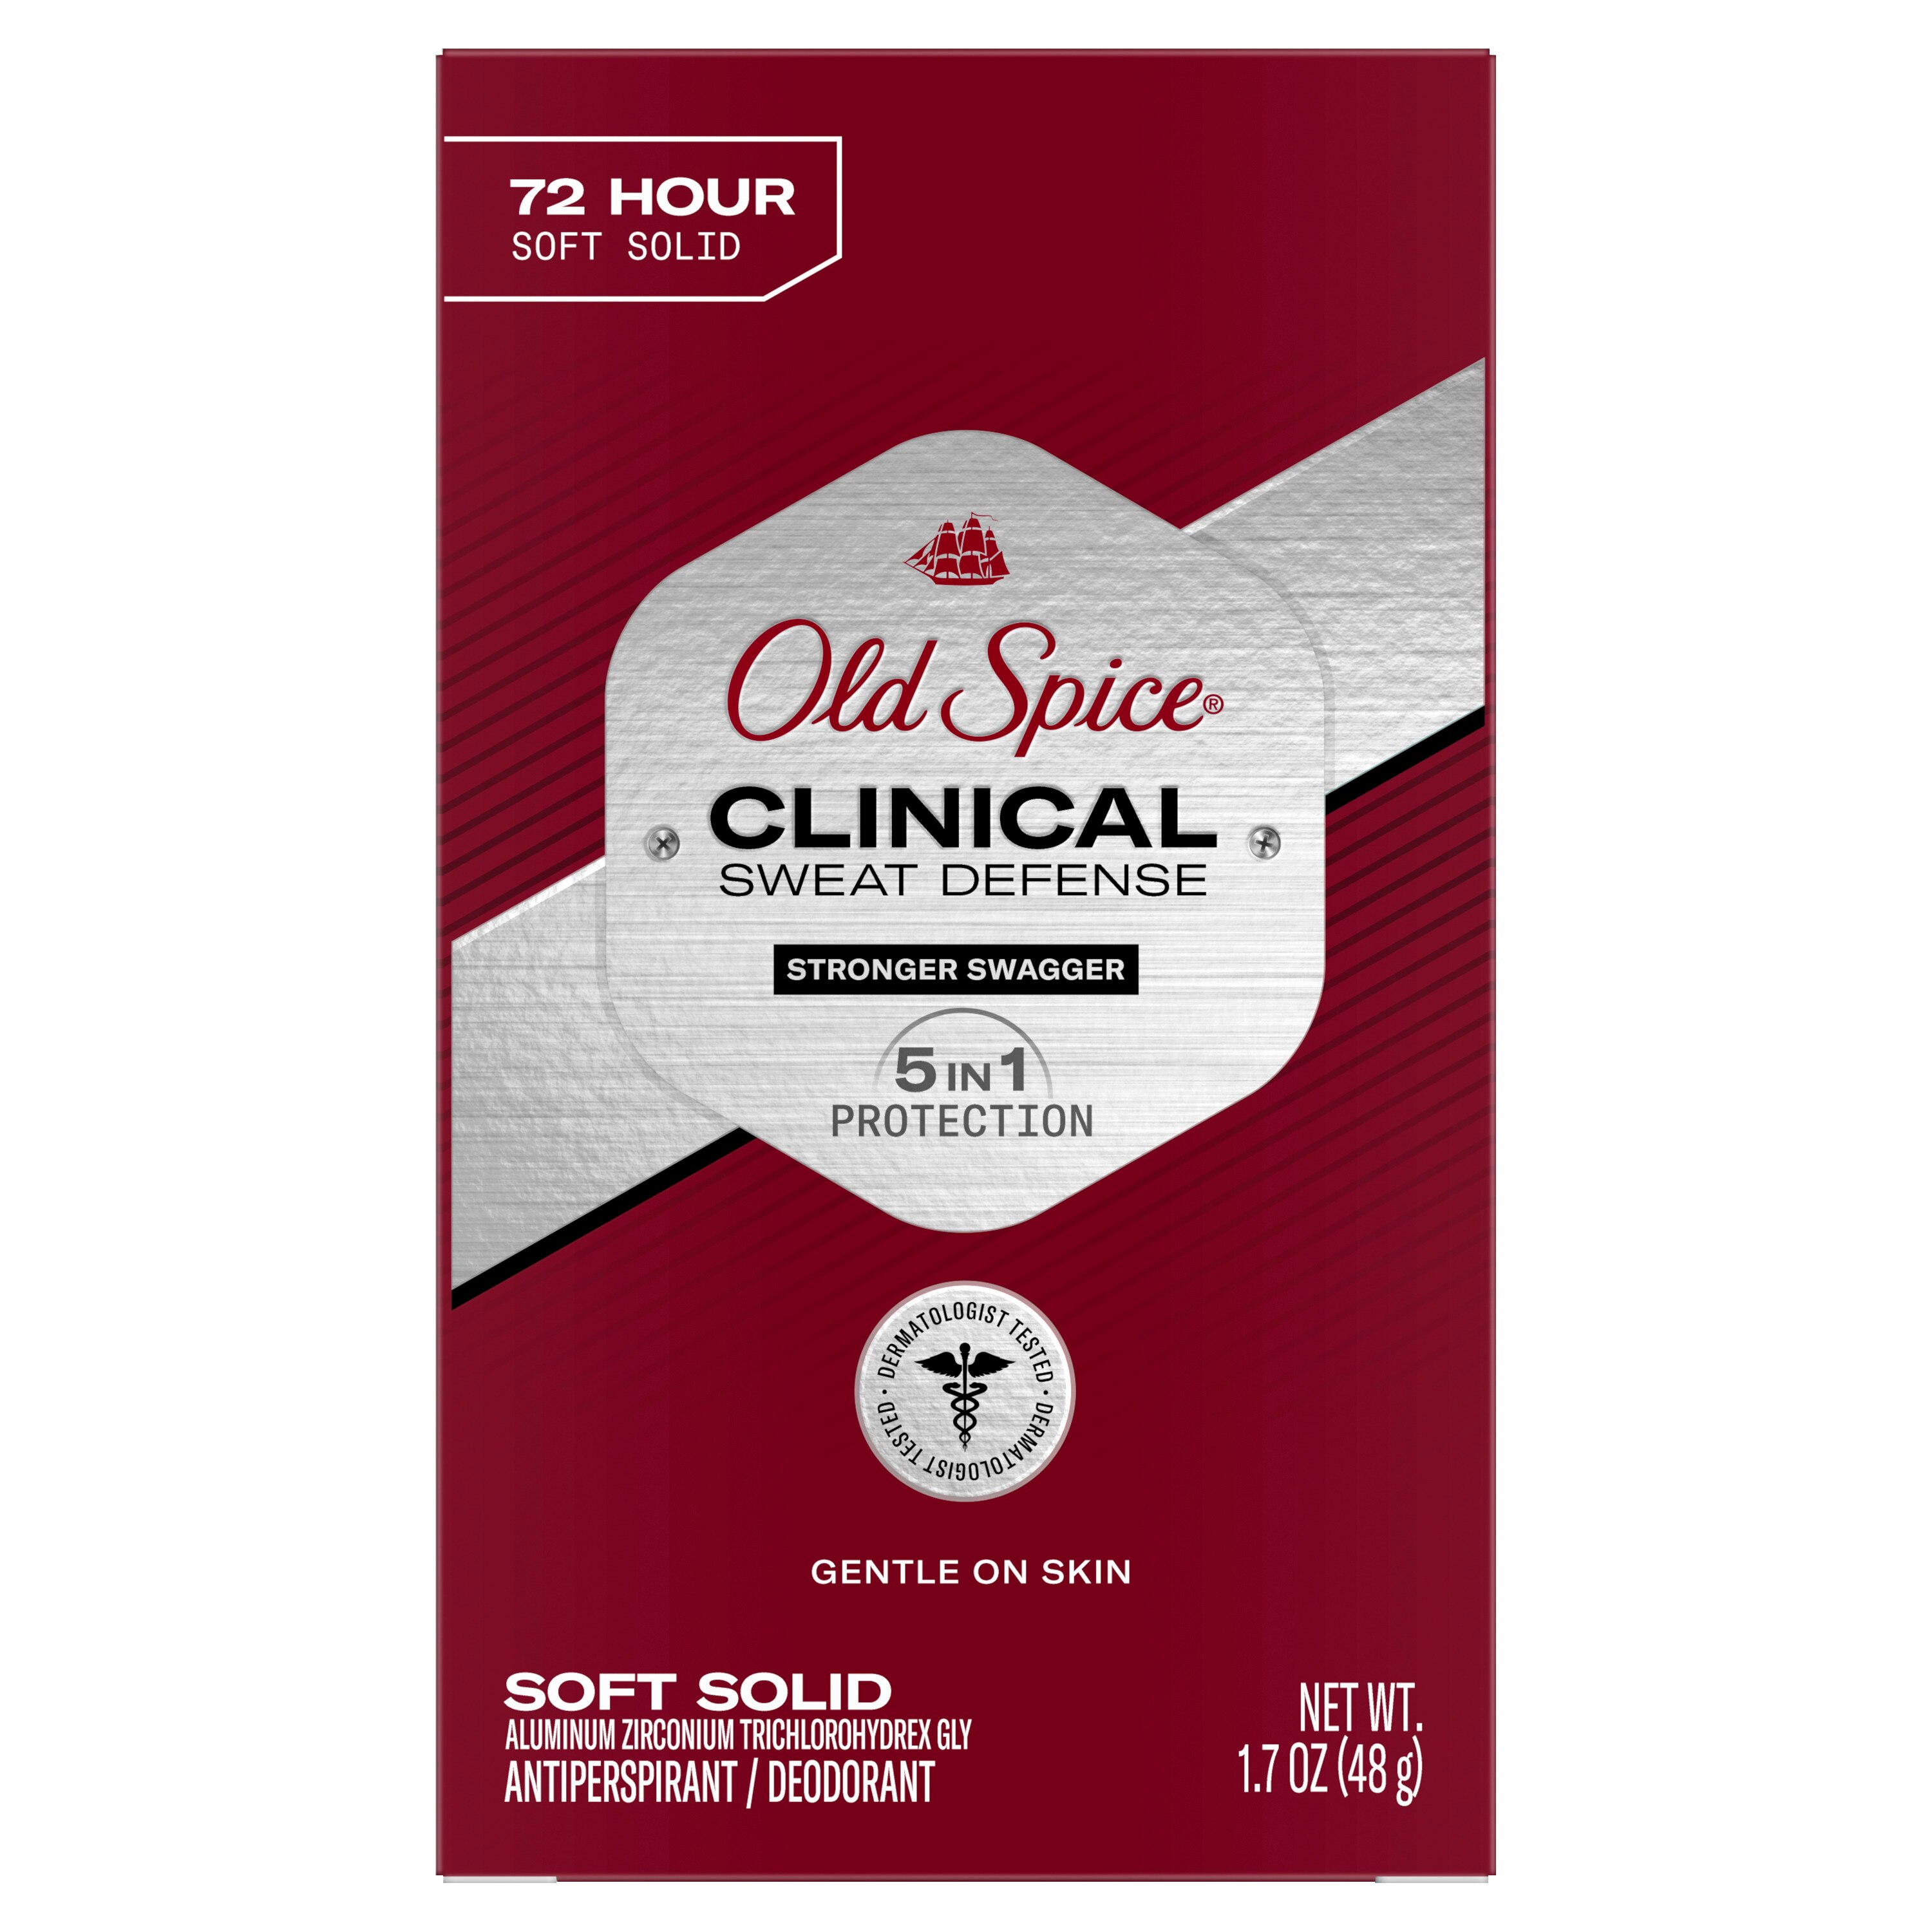 Old Spice Clinical Sweat Defense Anti-Perspirant Deodorant For Men, 72 Hour, Stronger Swagger, 1.7 Oz , CVS